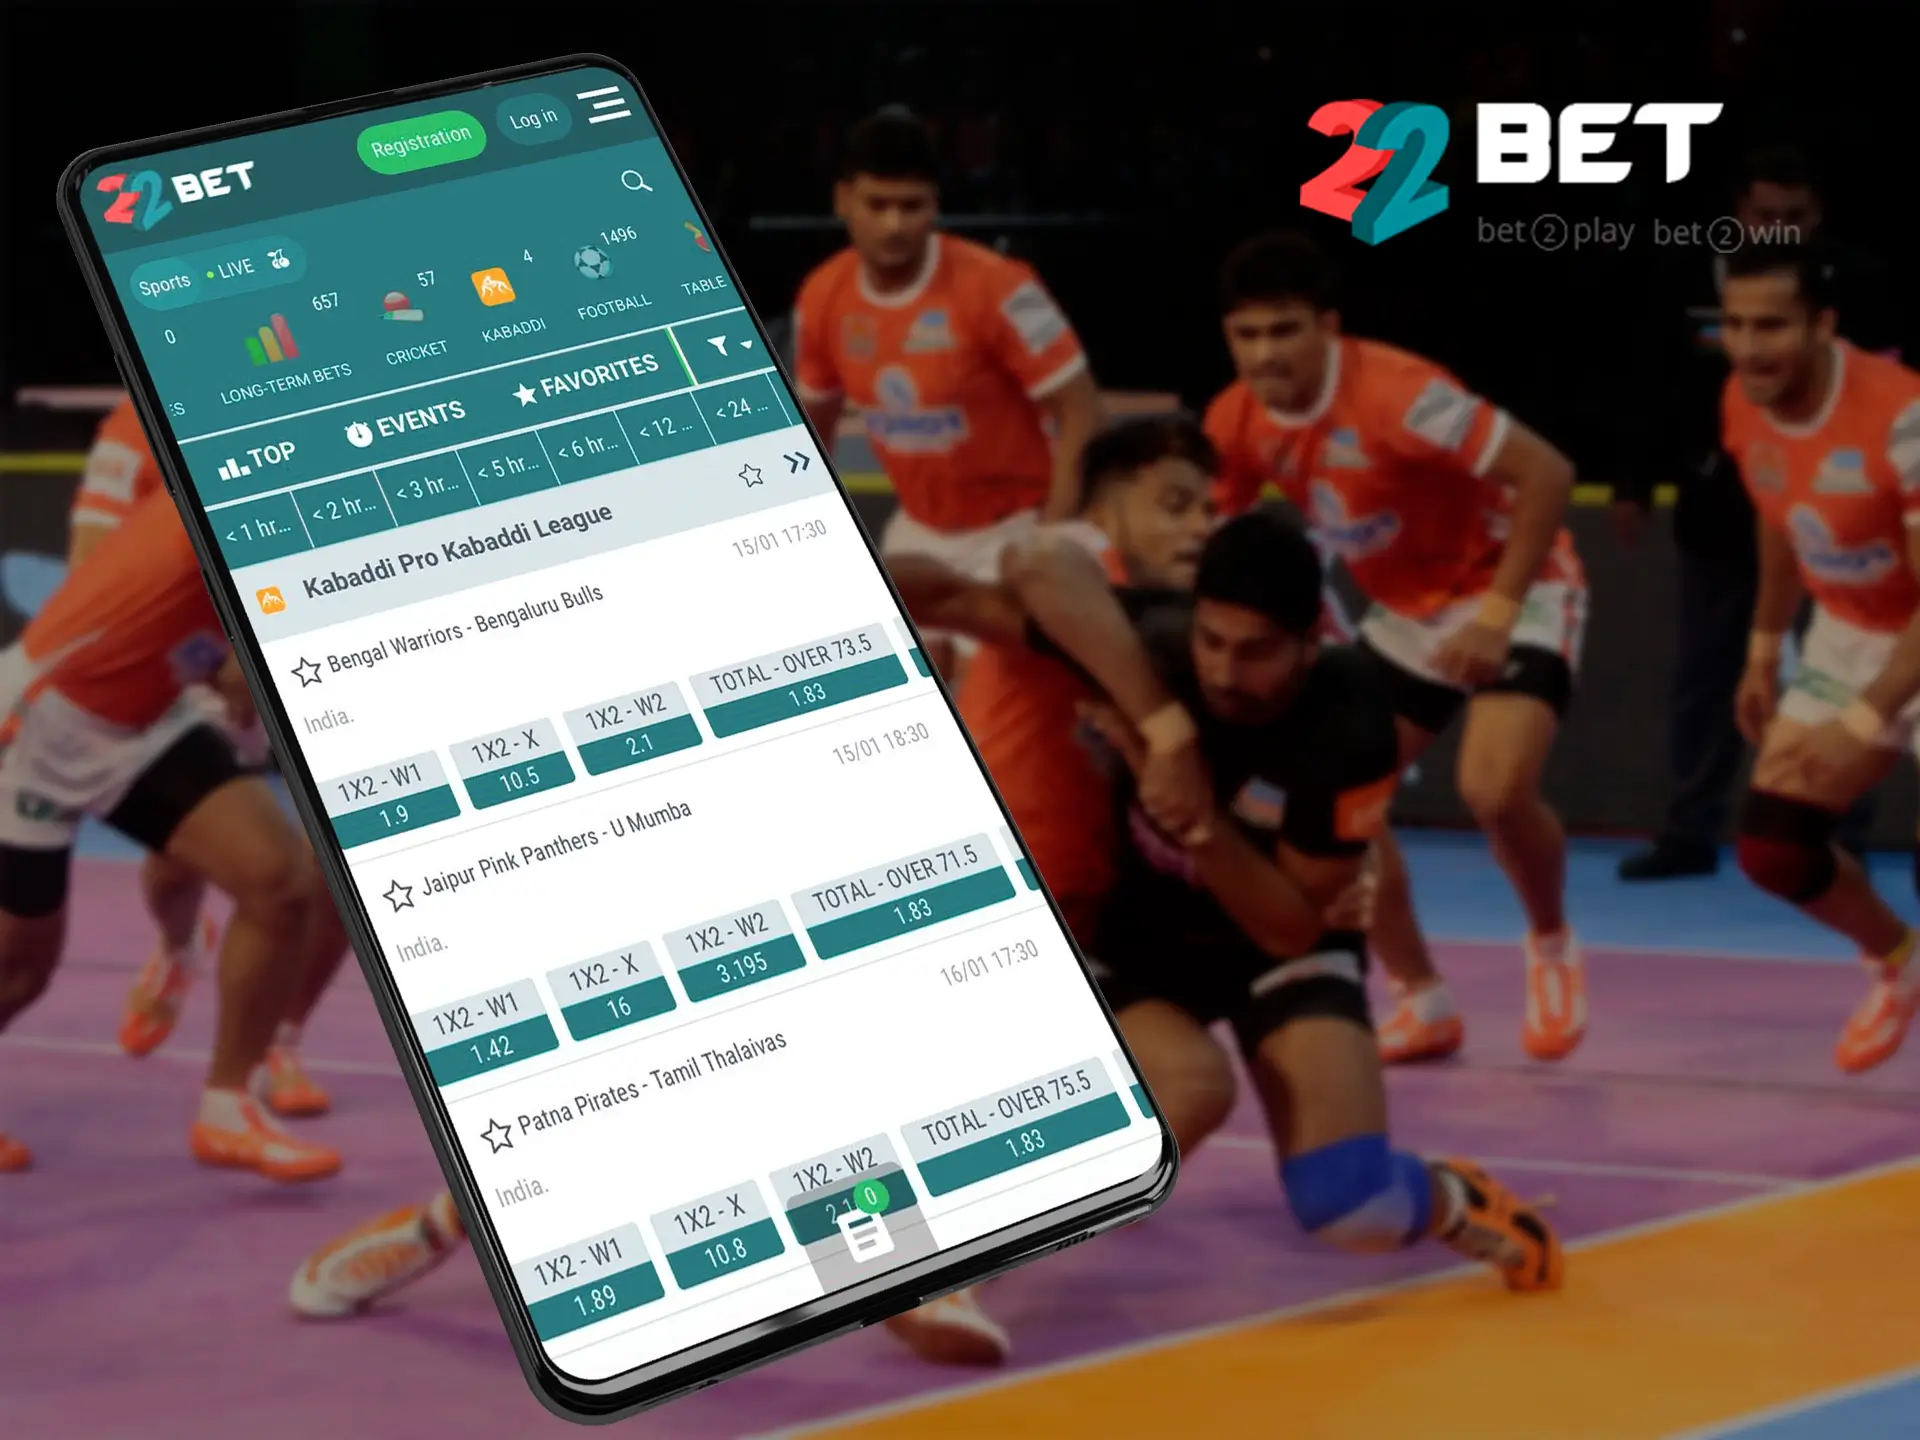 The great functionality of the 22Bet app allows punters to place a variety of bets on Kabaddi.